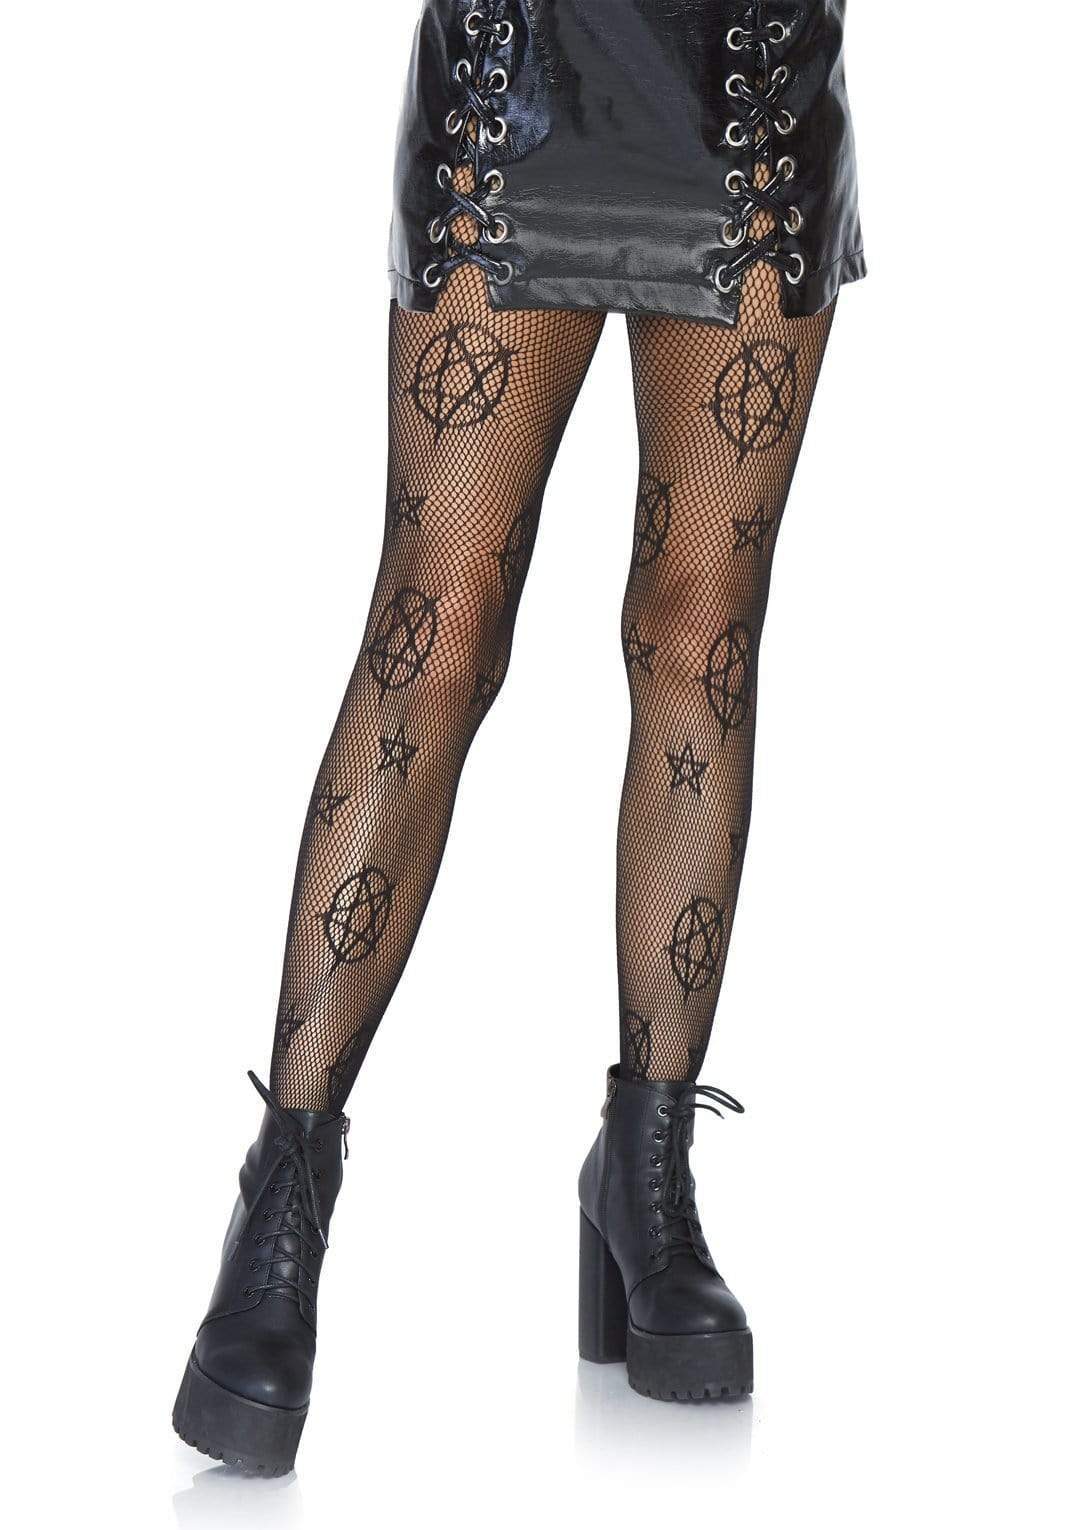 Fishnet Pantyhose with Occult Star Details